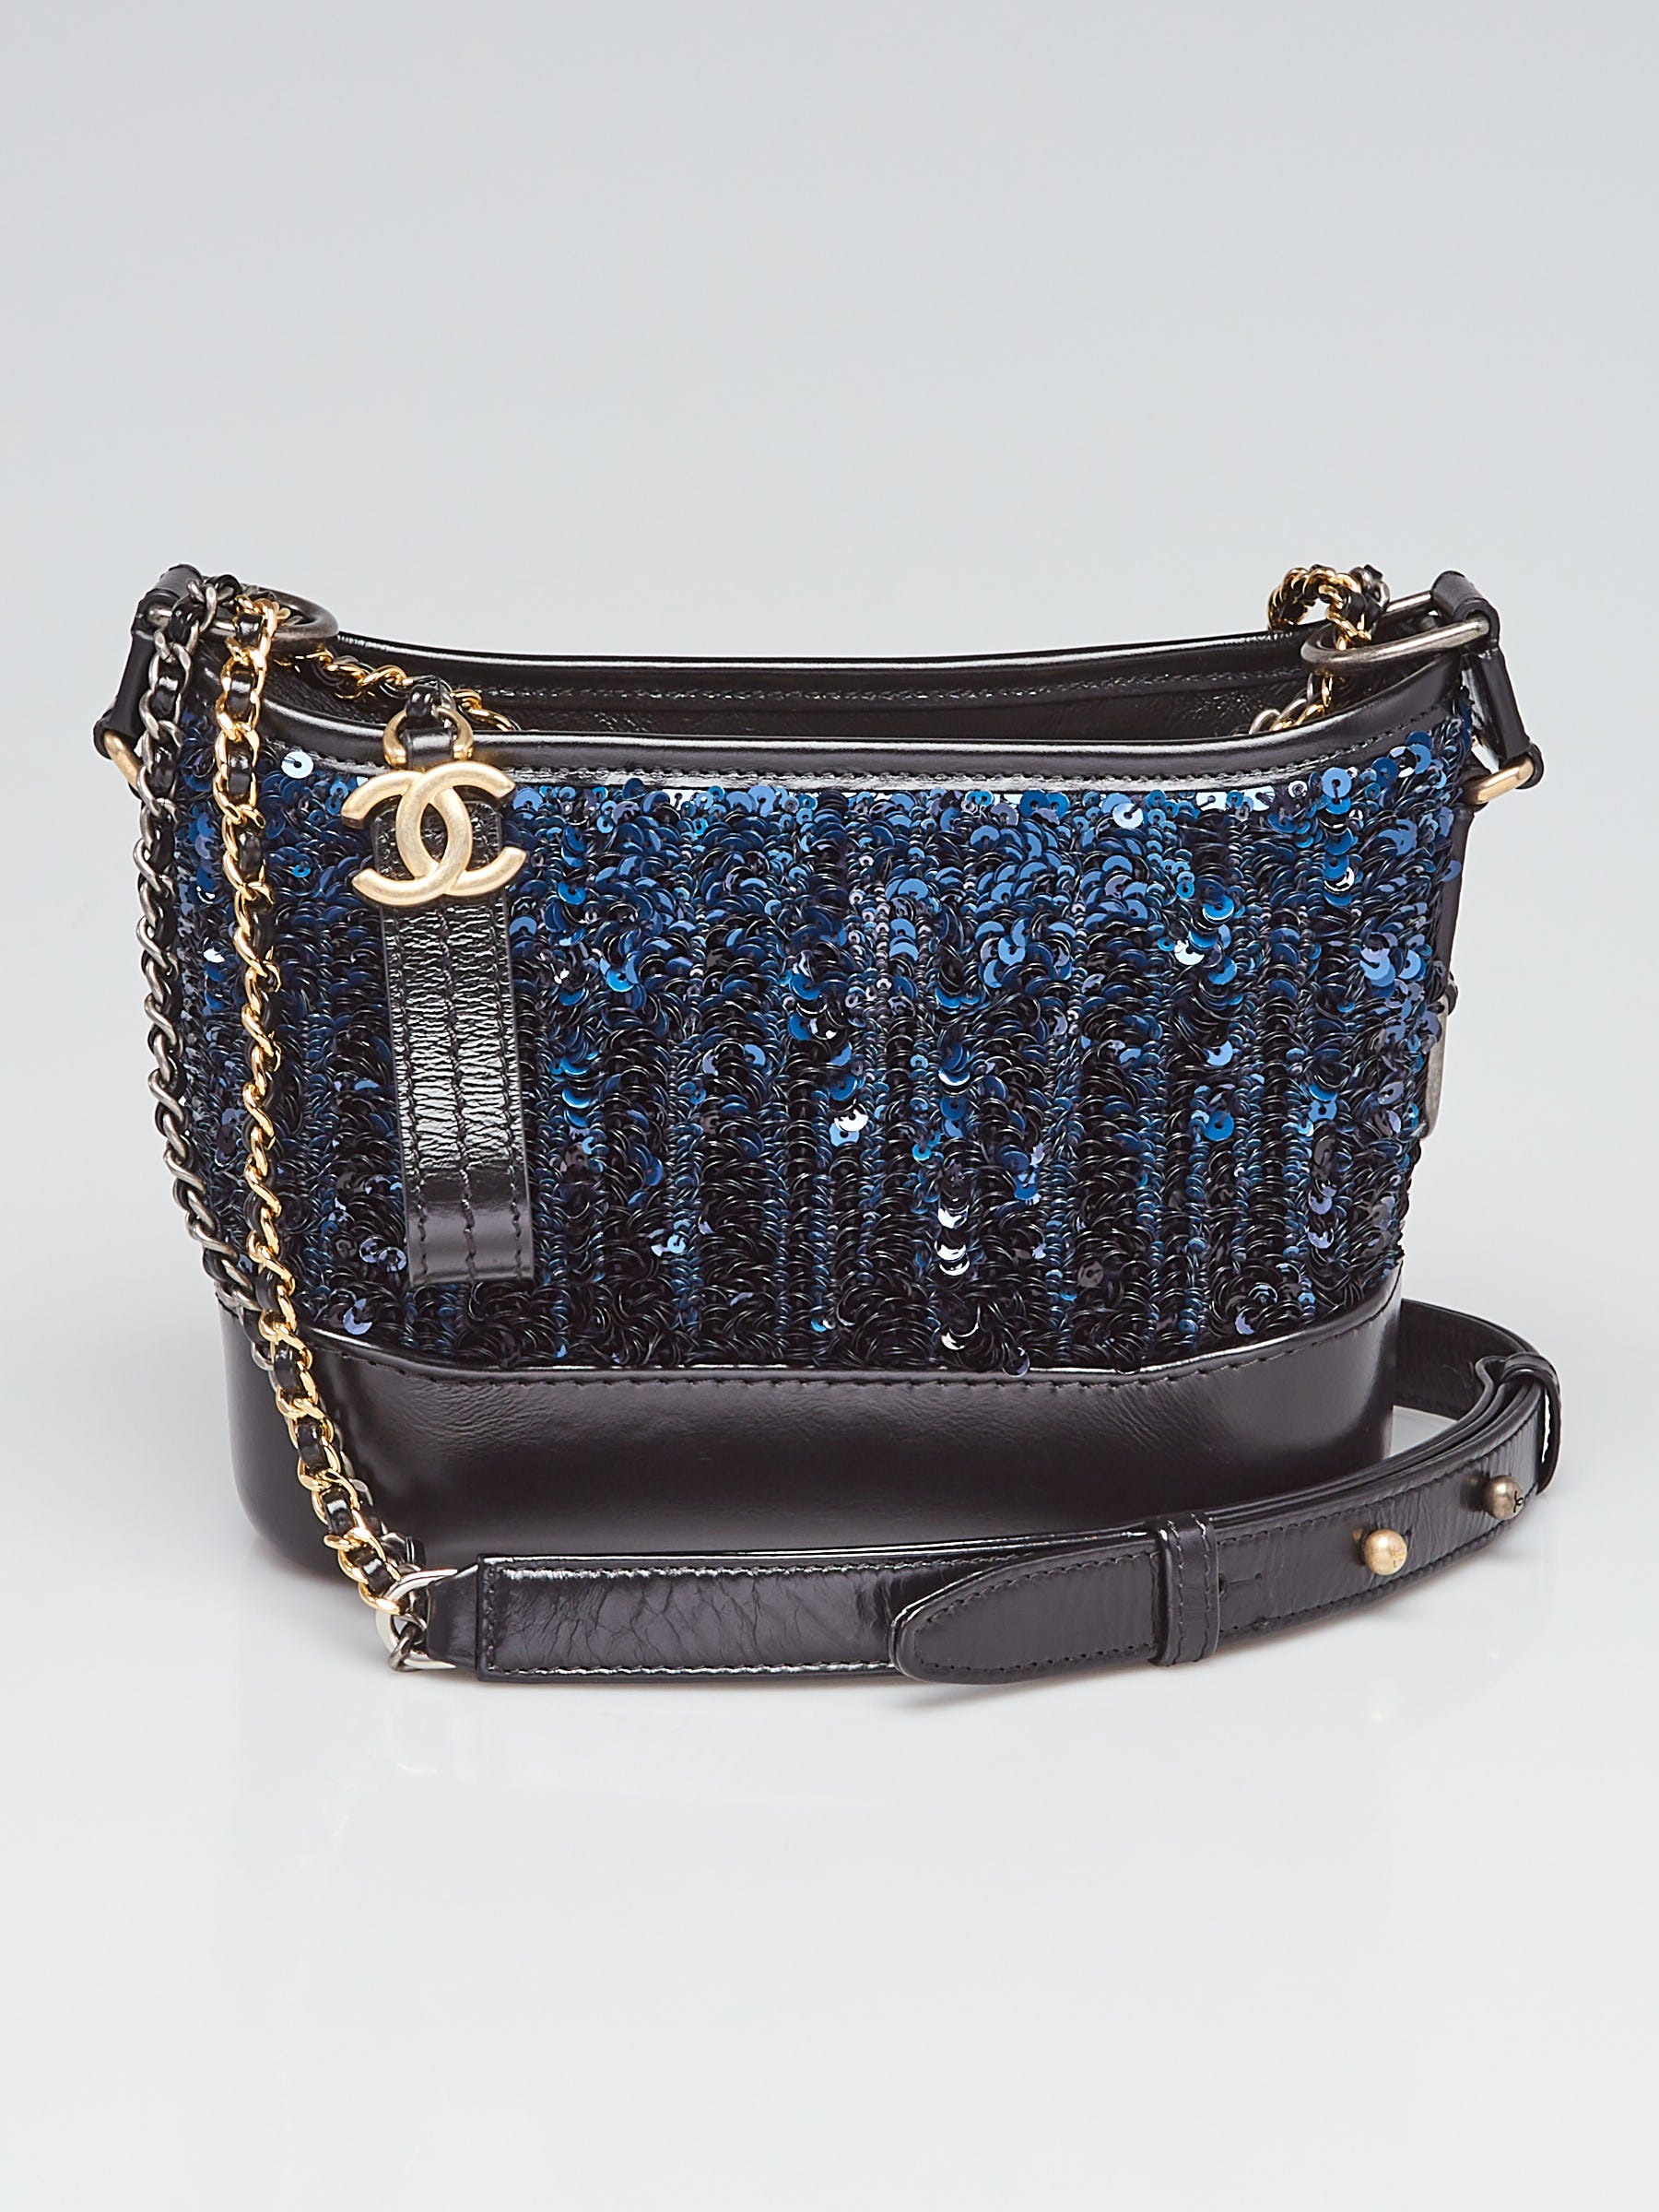 Chanel Tweed And Blue Leather Small Gabrielle Bag Tricolor